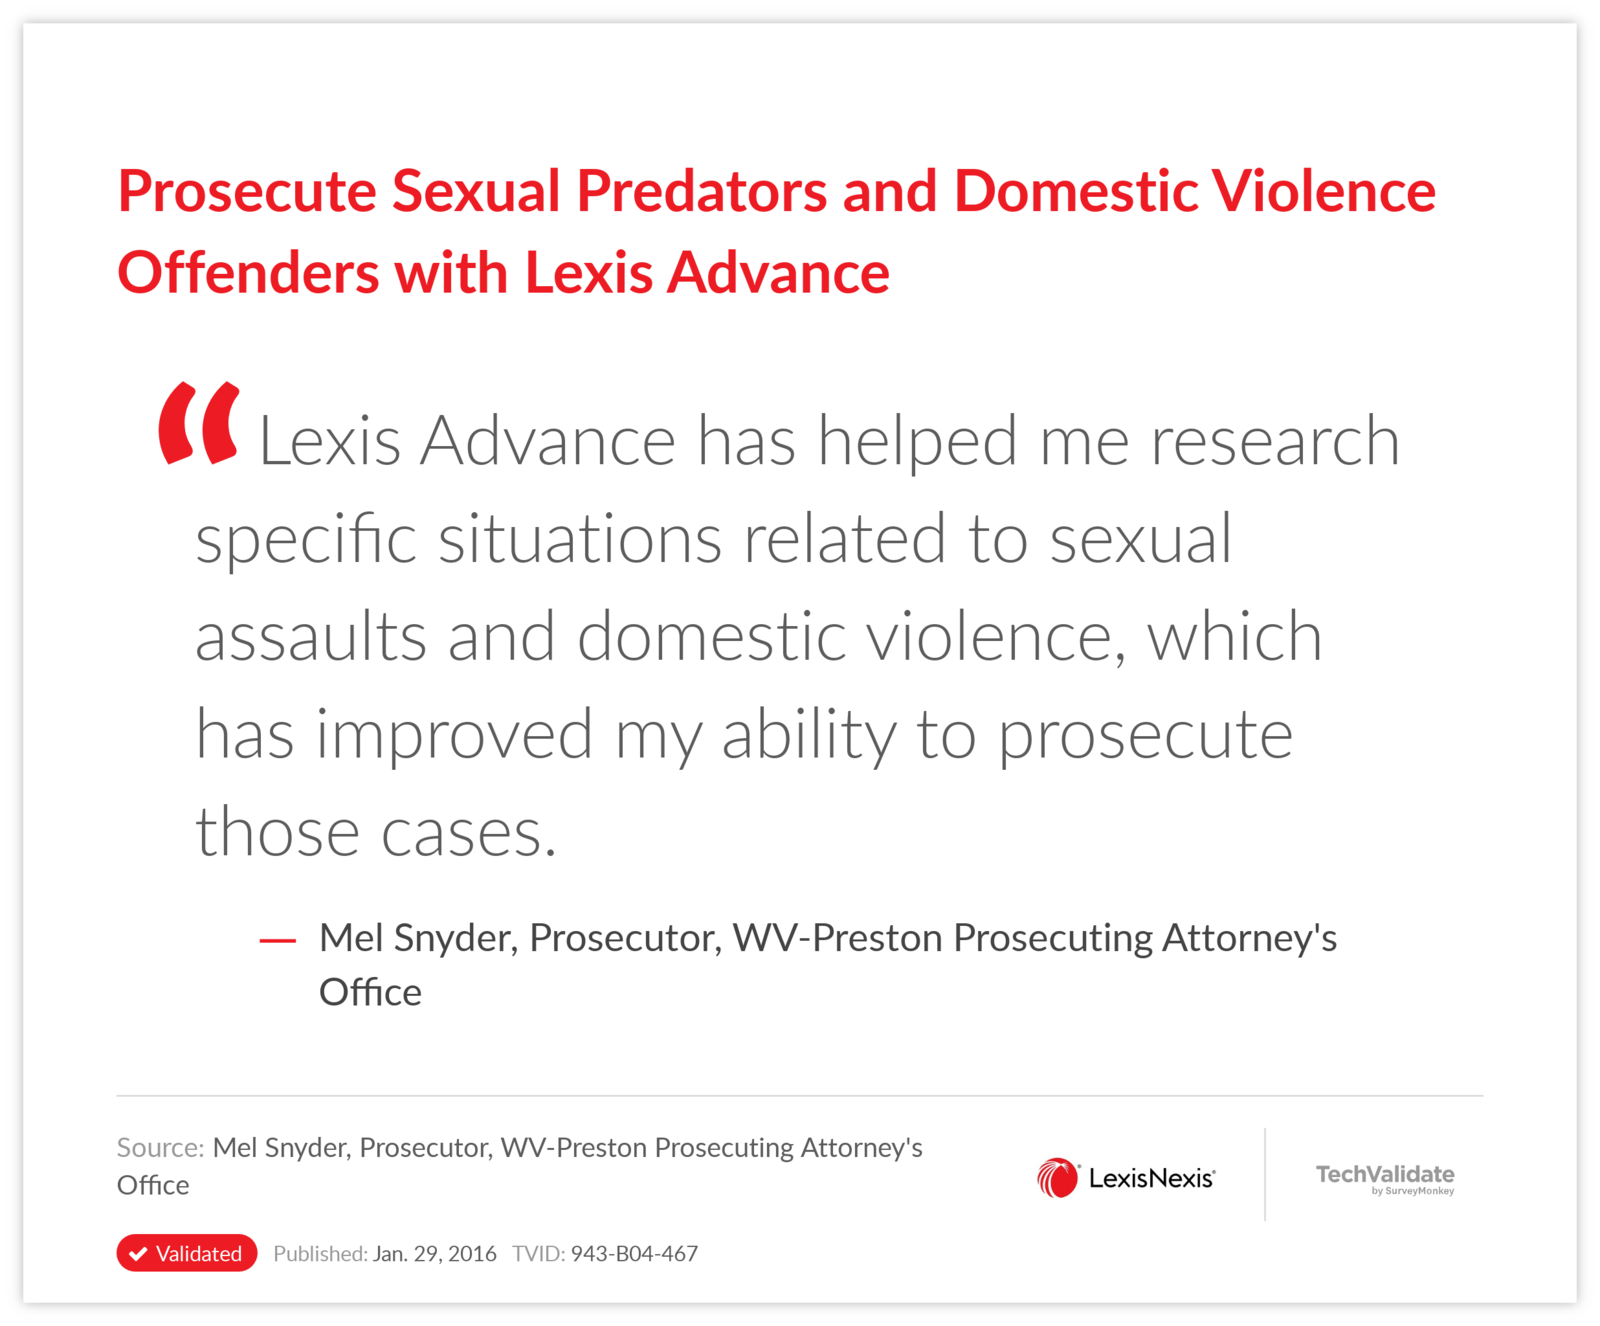 Prosecute Sexual Predators and Domestic Violence Offenders with Lexis Advance